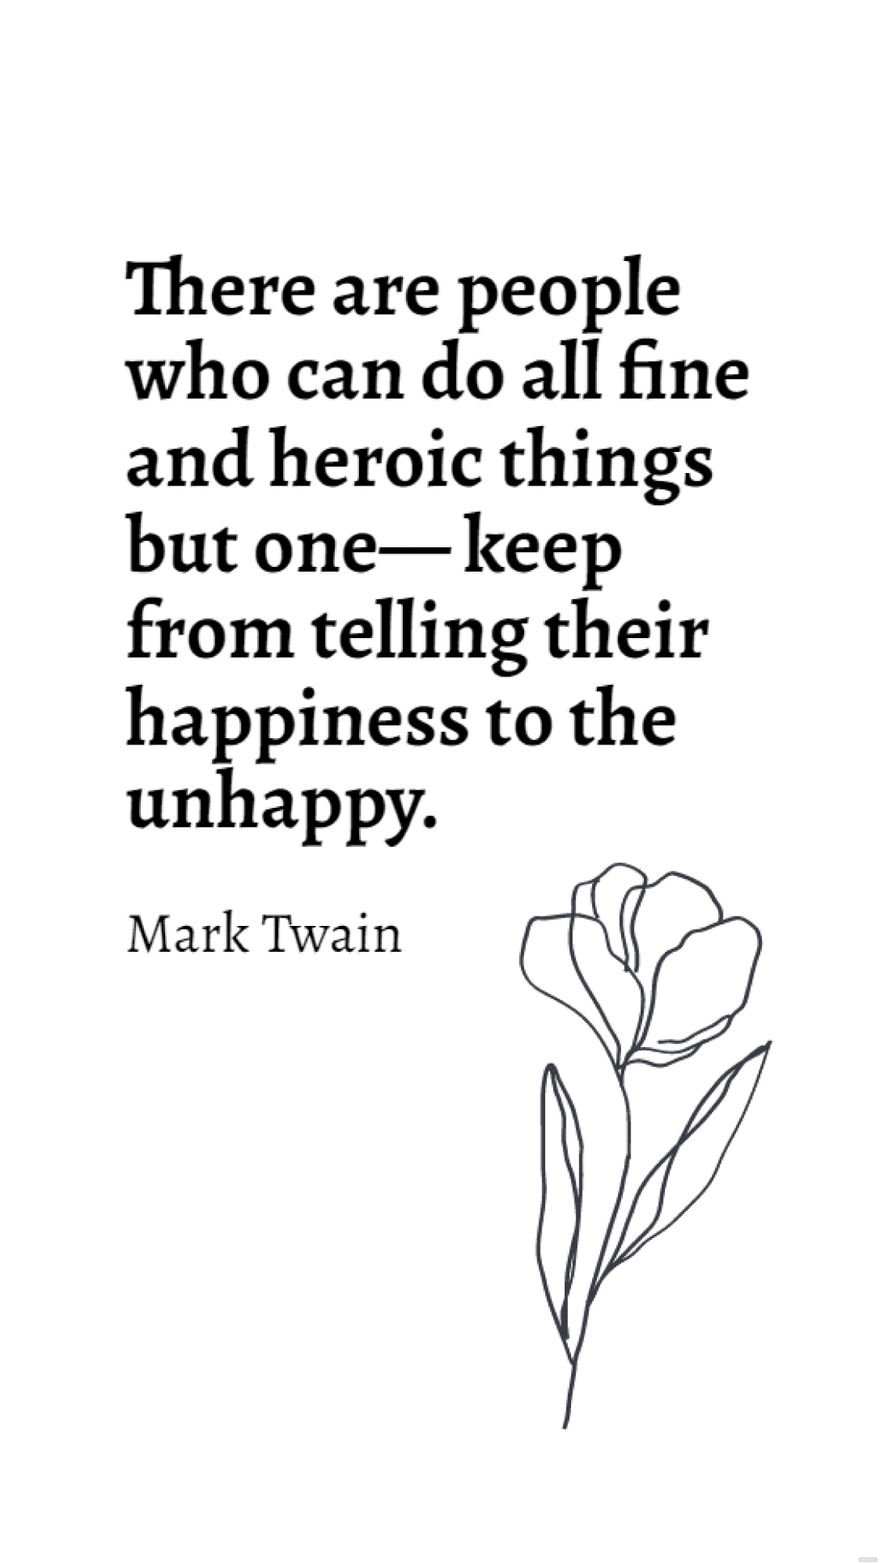 Free Mark Twain - There are people who can do all fine and heroic things but one - keep from telling their happiness to the unhappy. in JPG